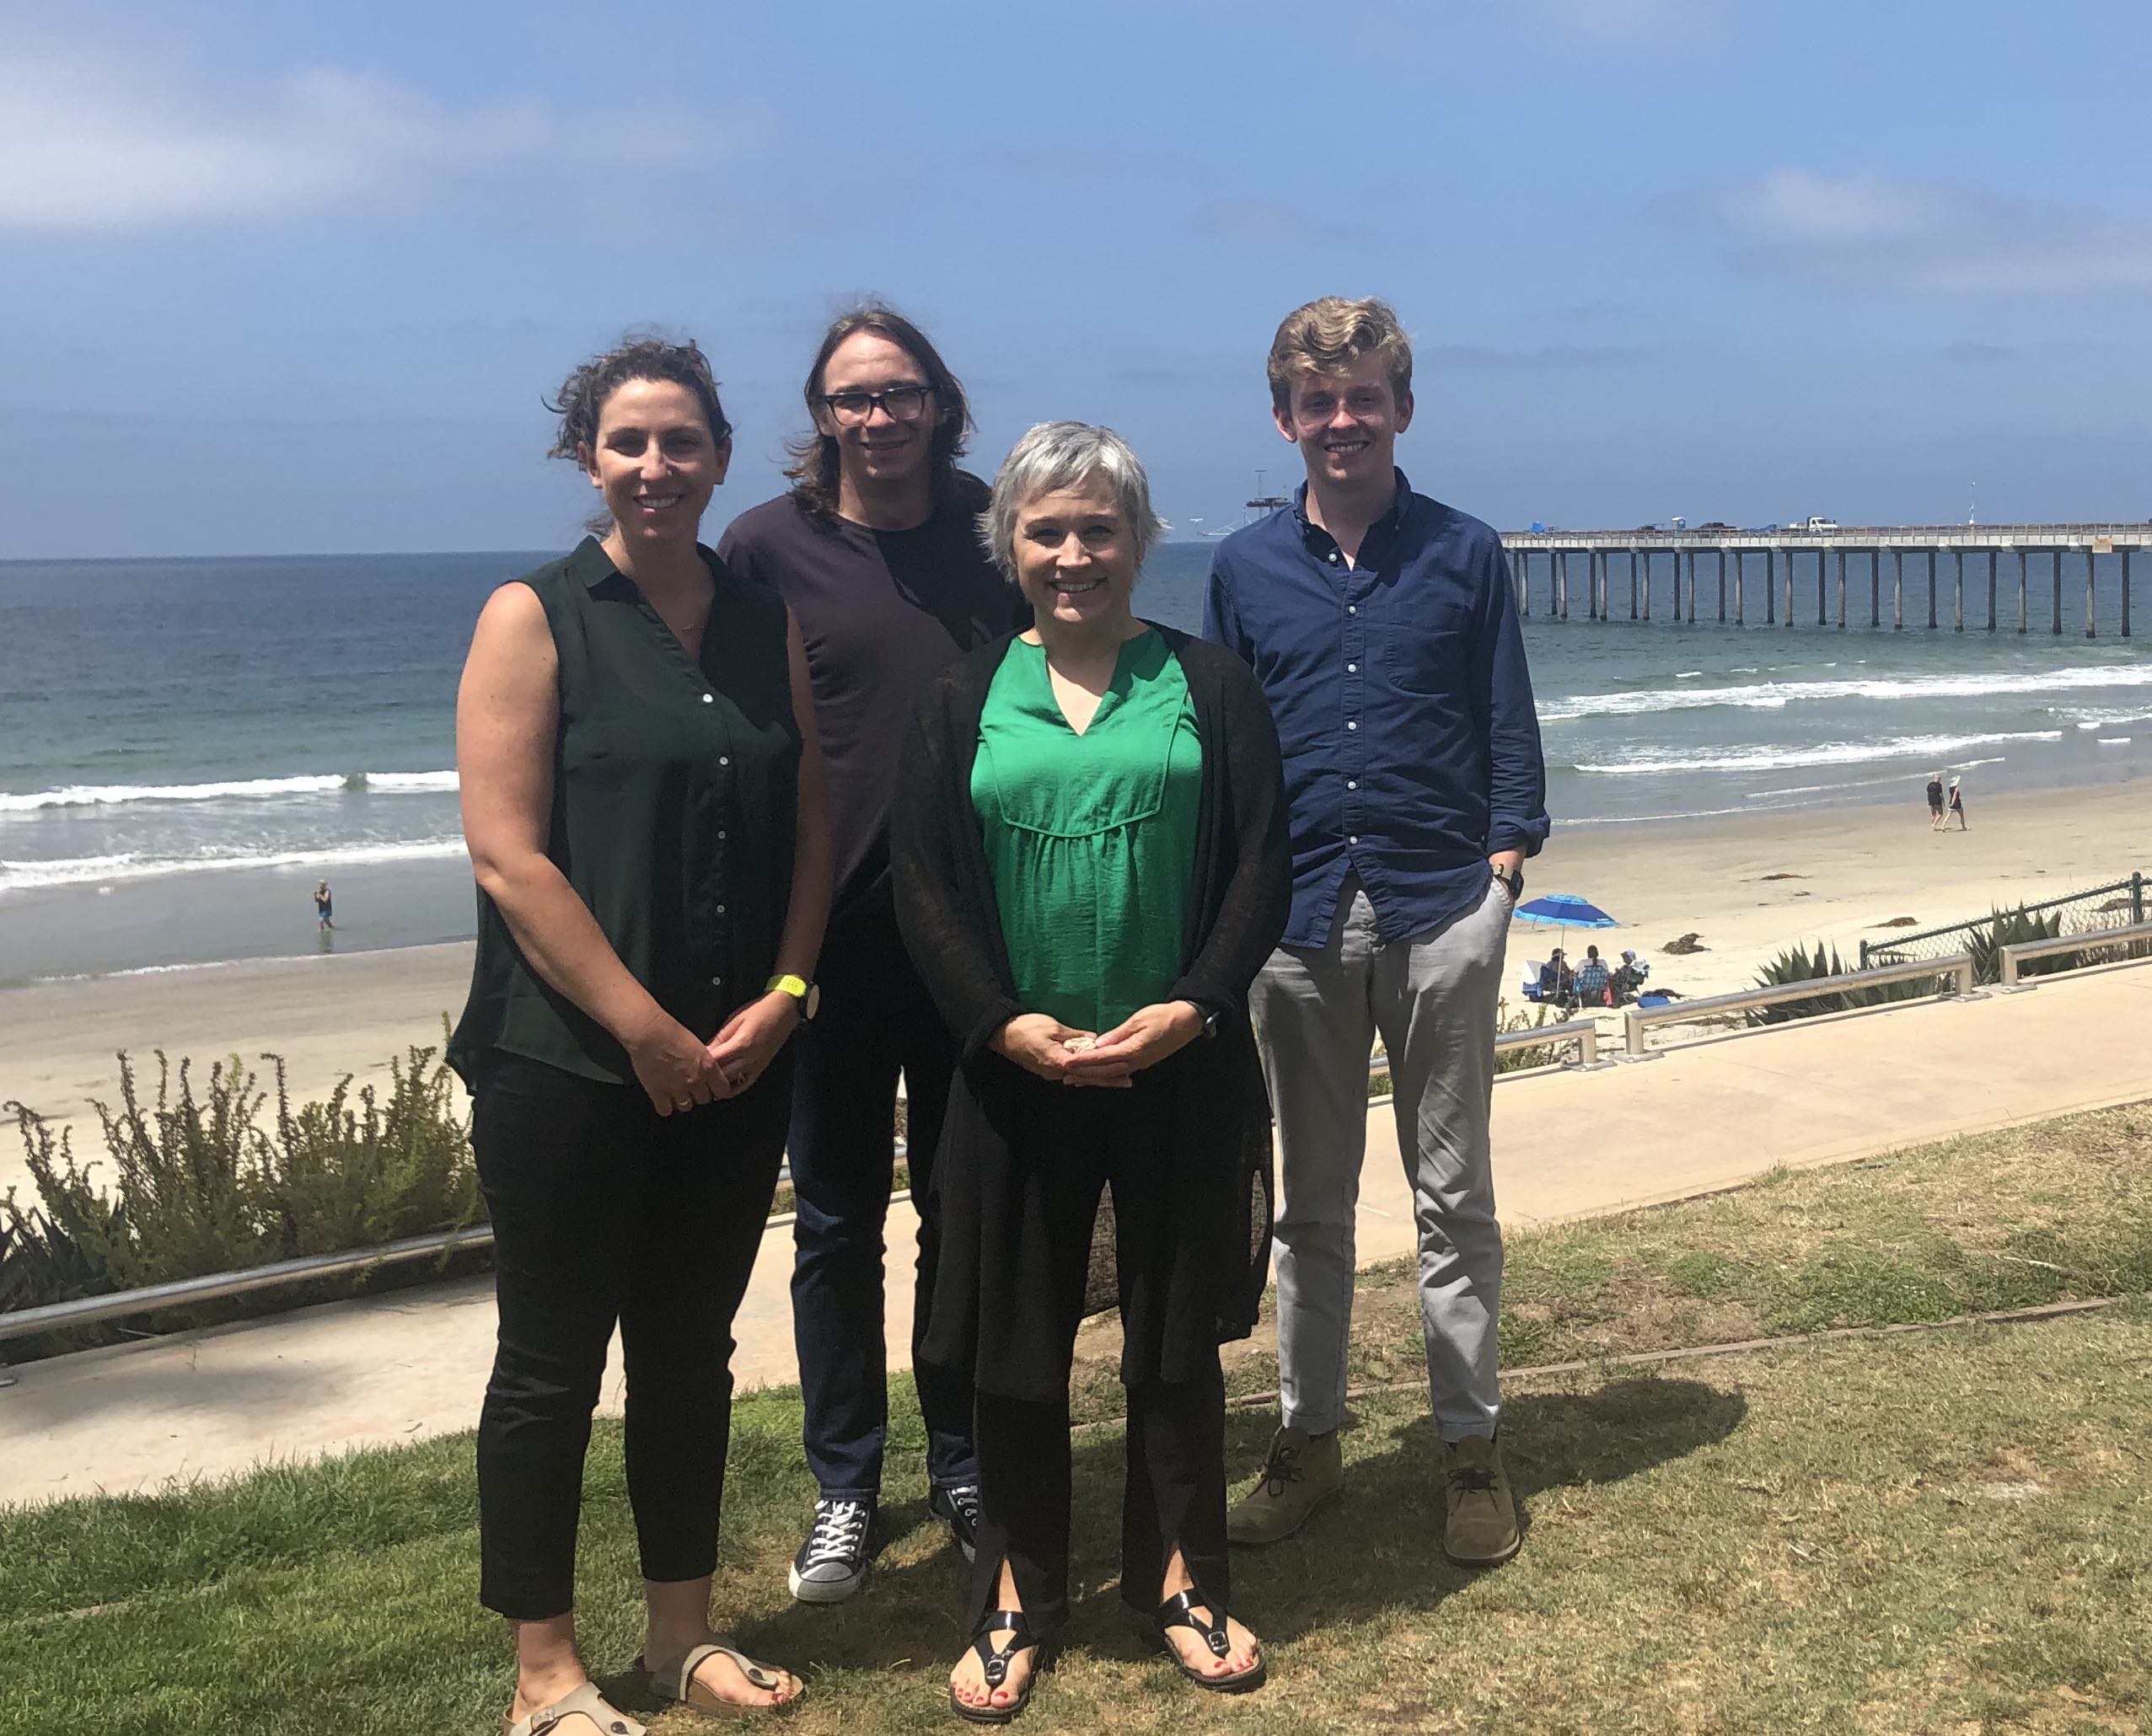 Most of the group at the Chapman Conference in La Jolla CA, Aug 2019